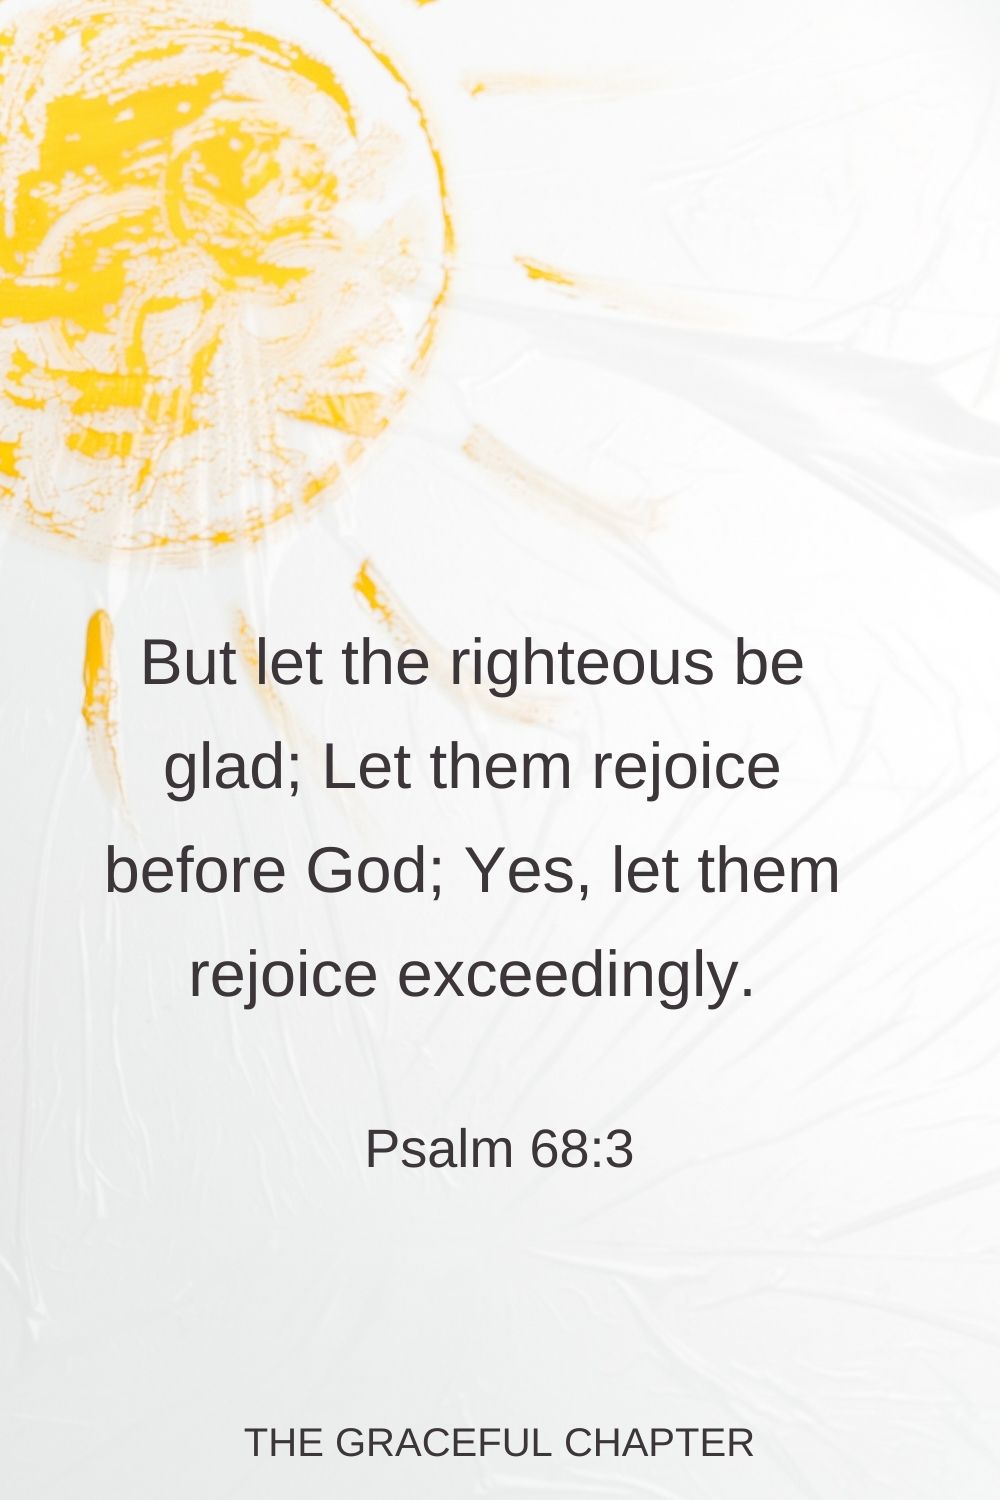 But let the righteous be glad; Let them rejoice before God; Yes, let them rejoice exceedingly. Psalm 68:3